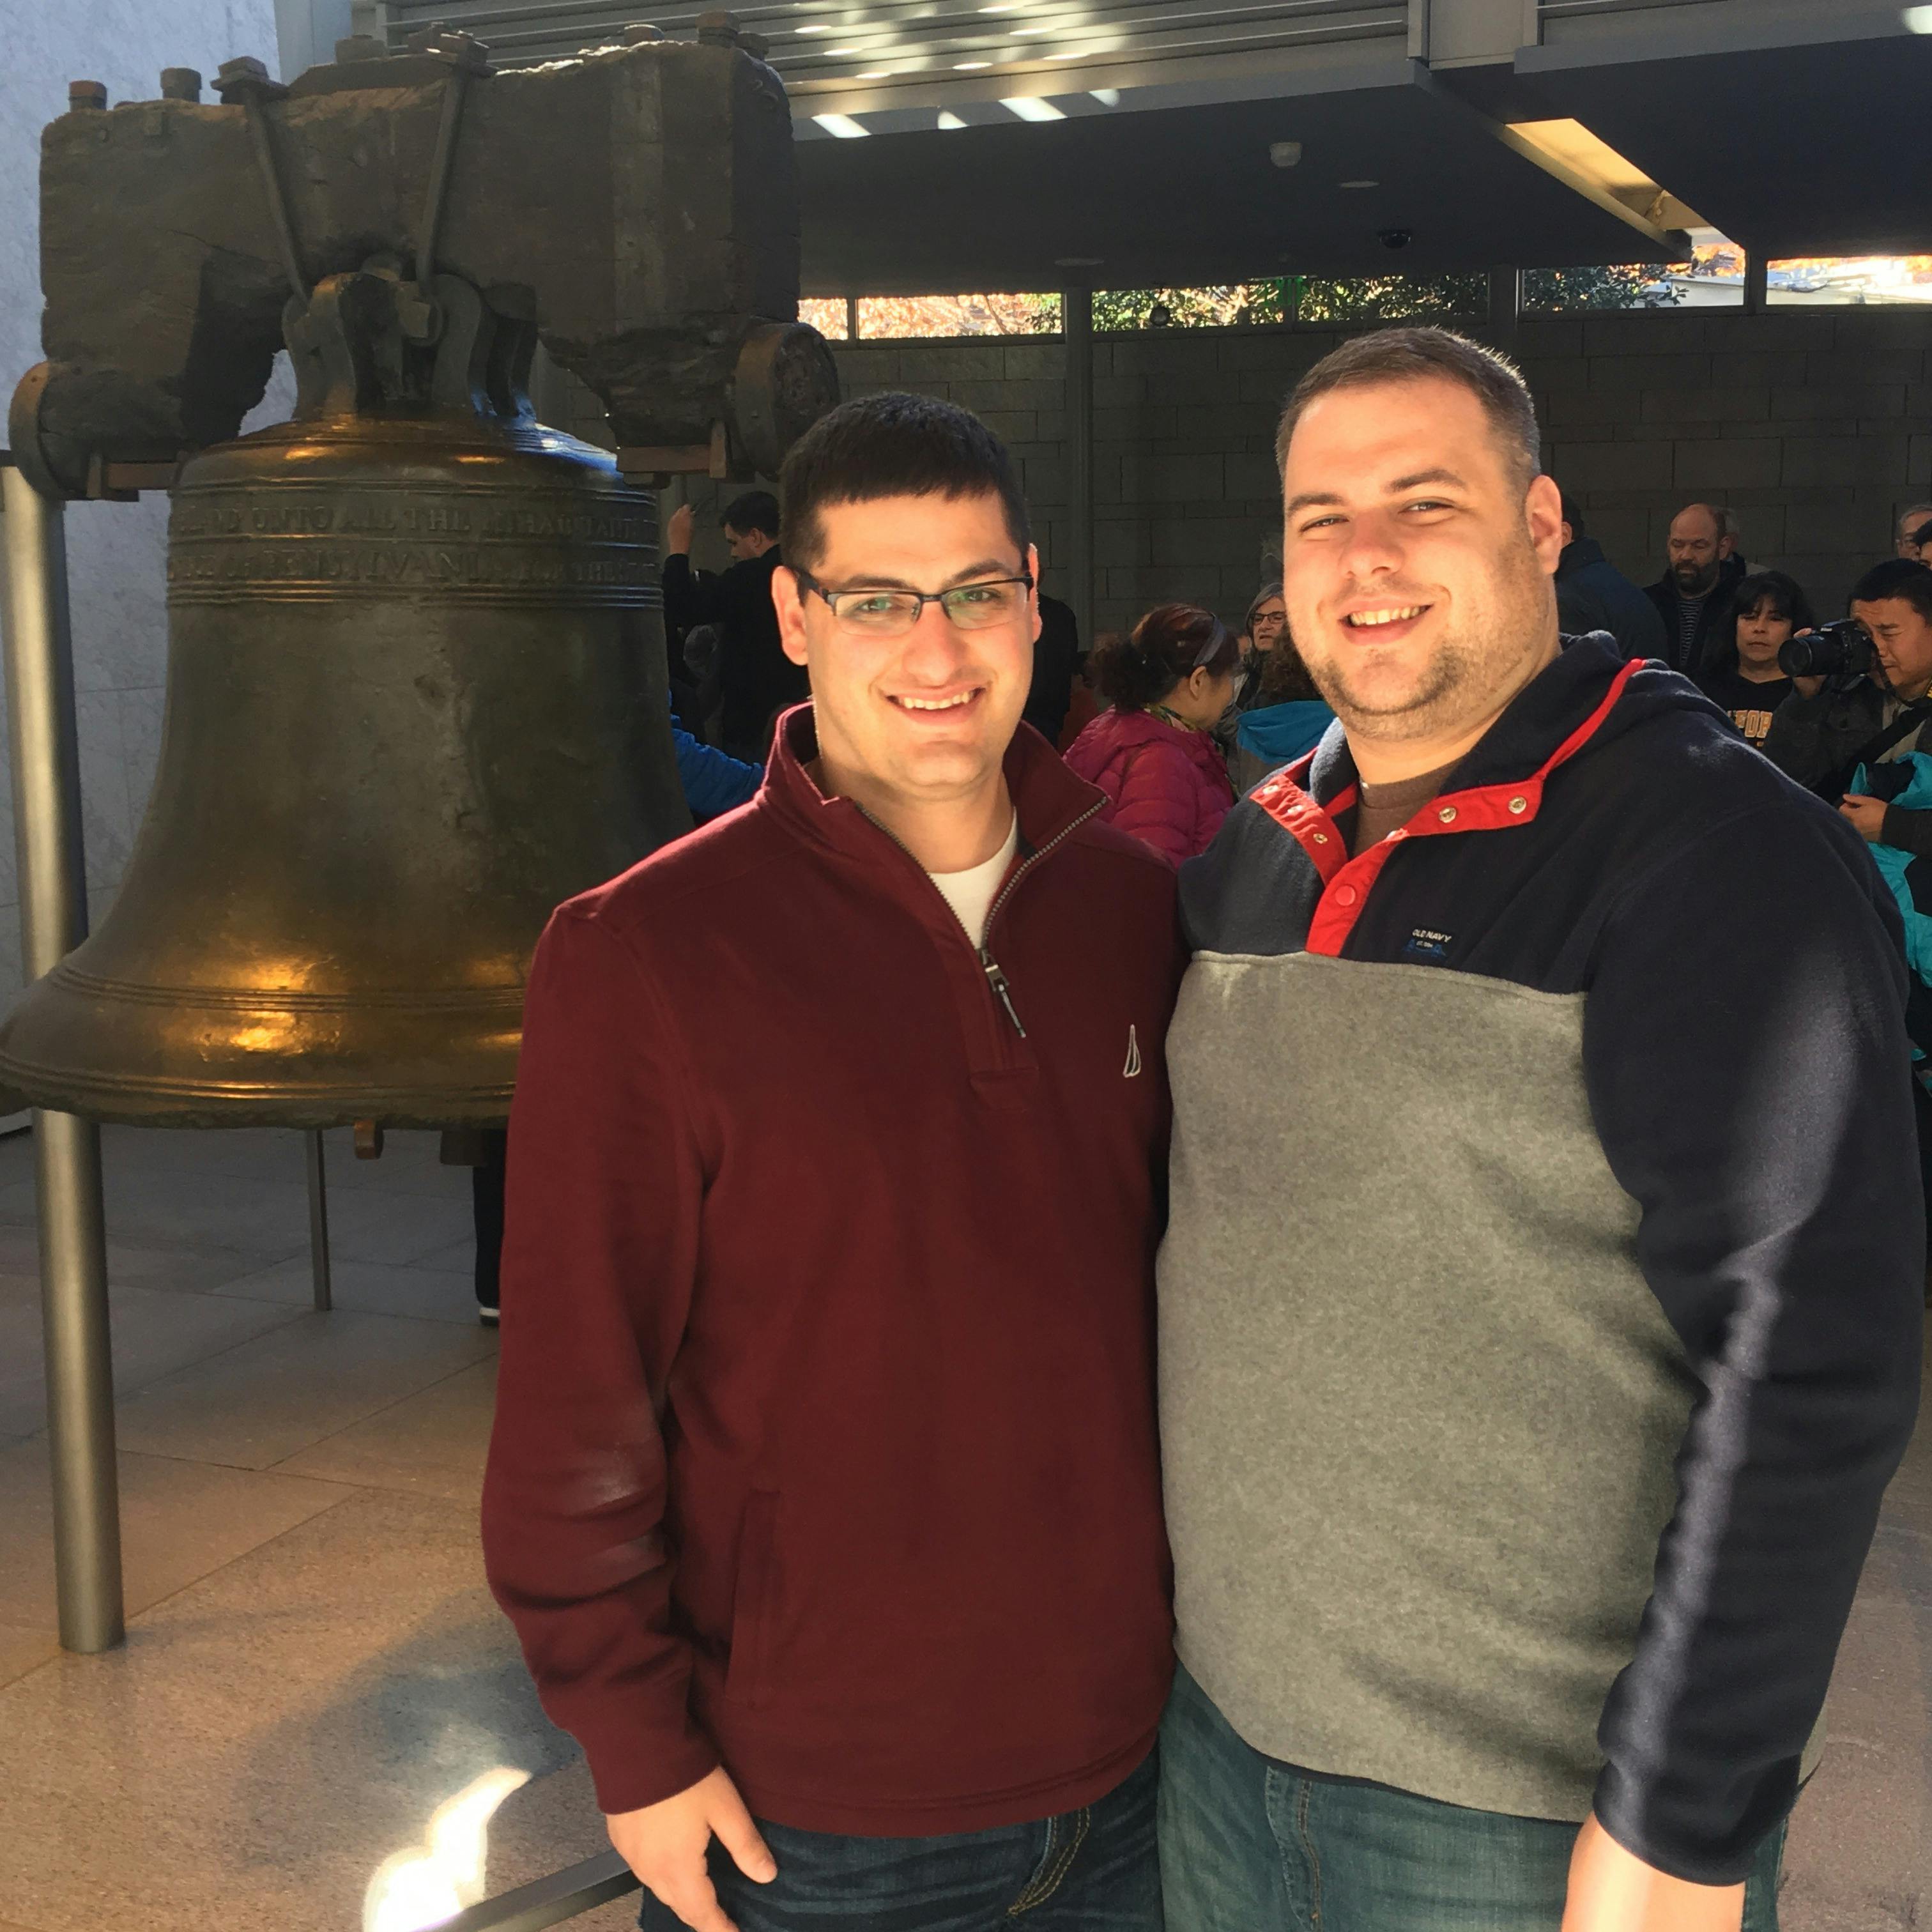 In front of the Liberty Bell on a trip to Philadelphia, PA.